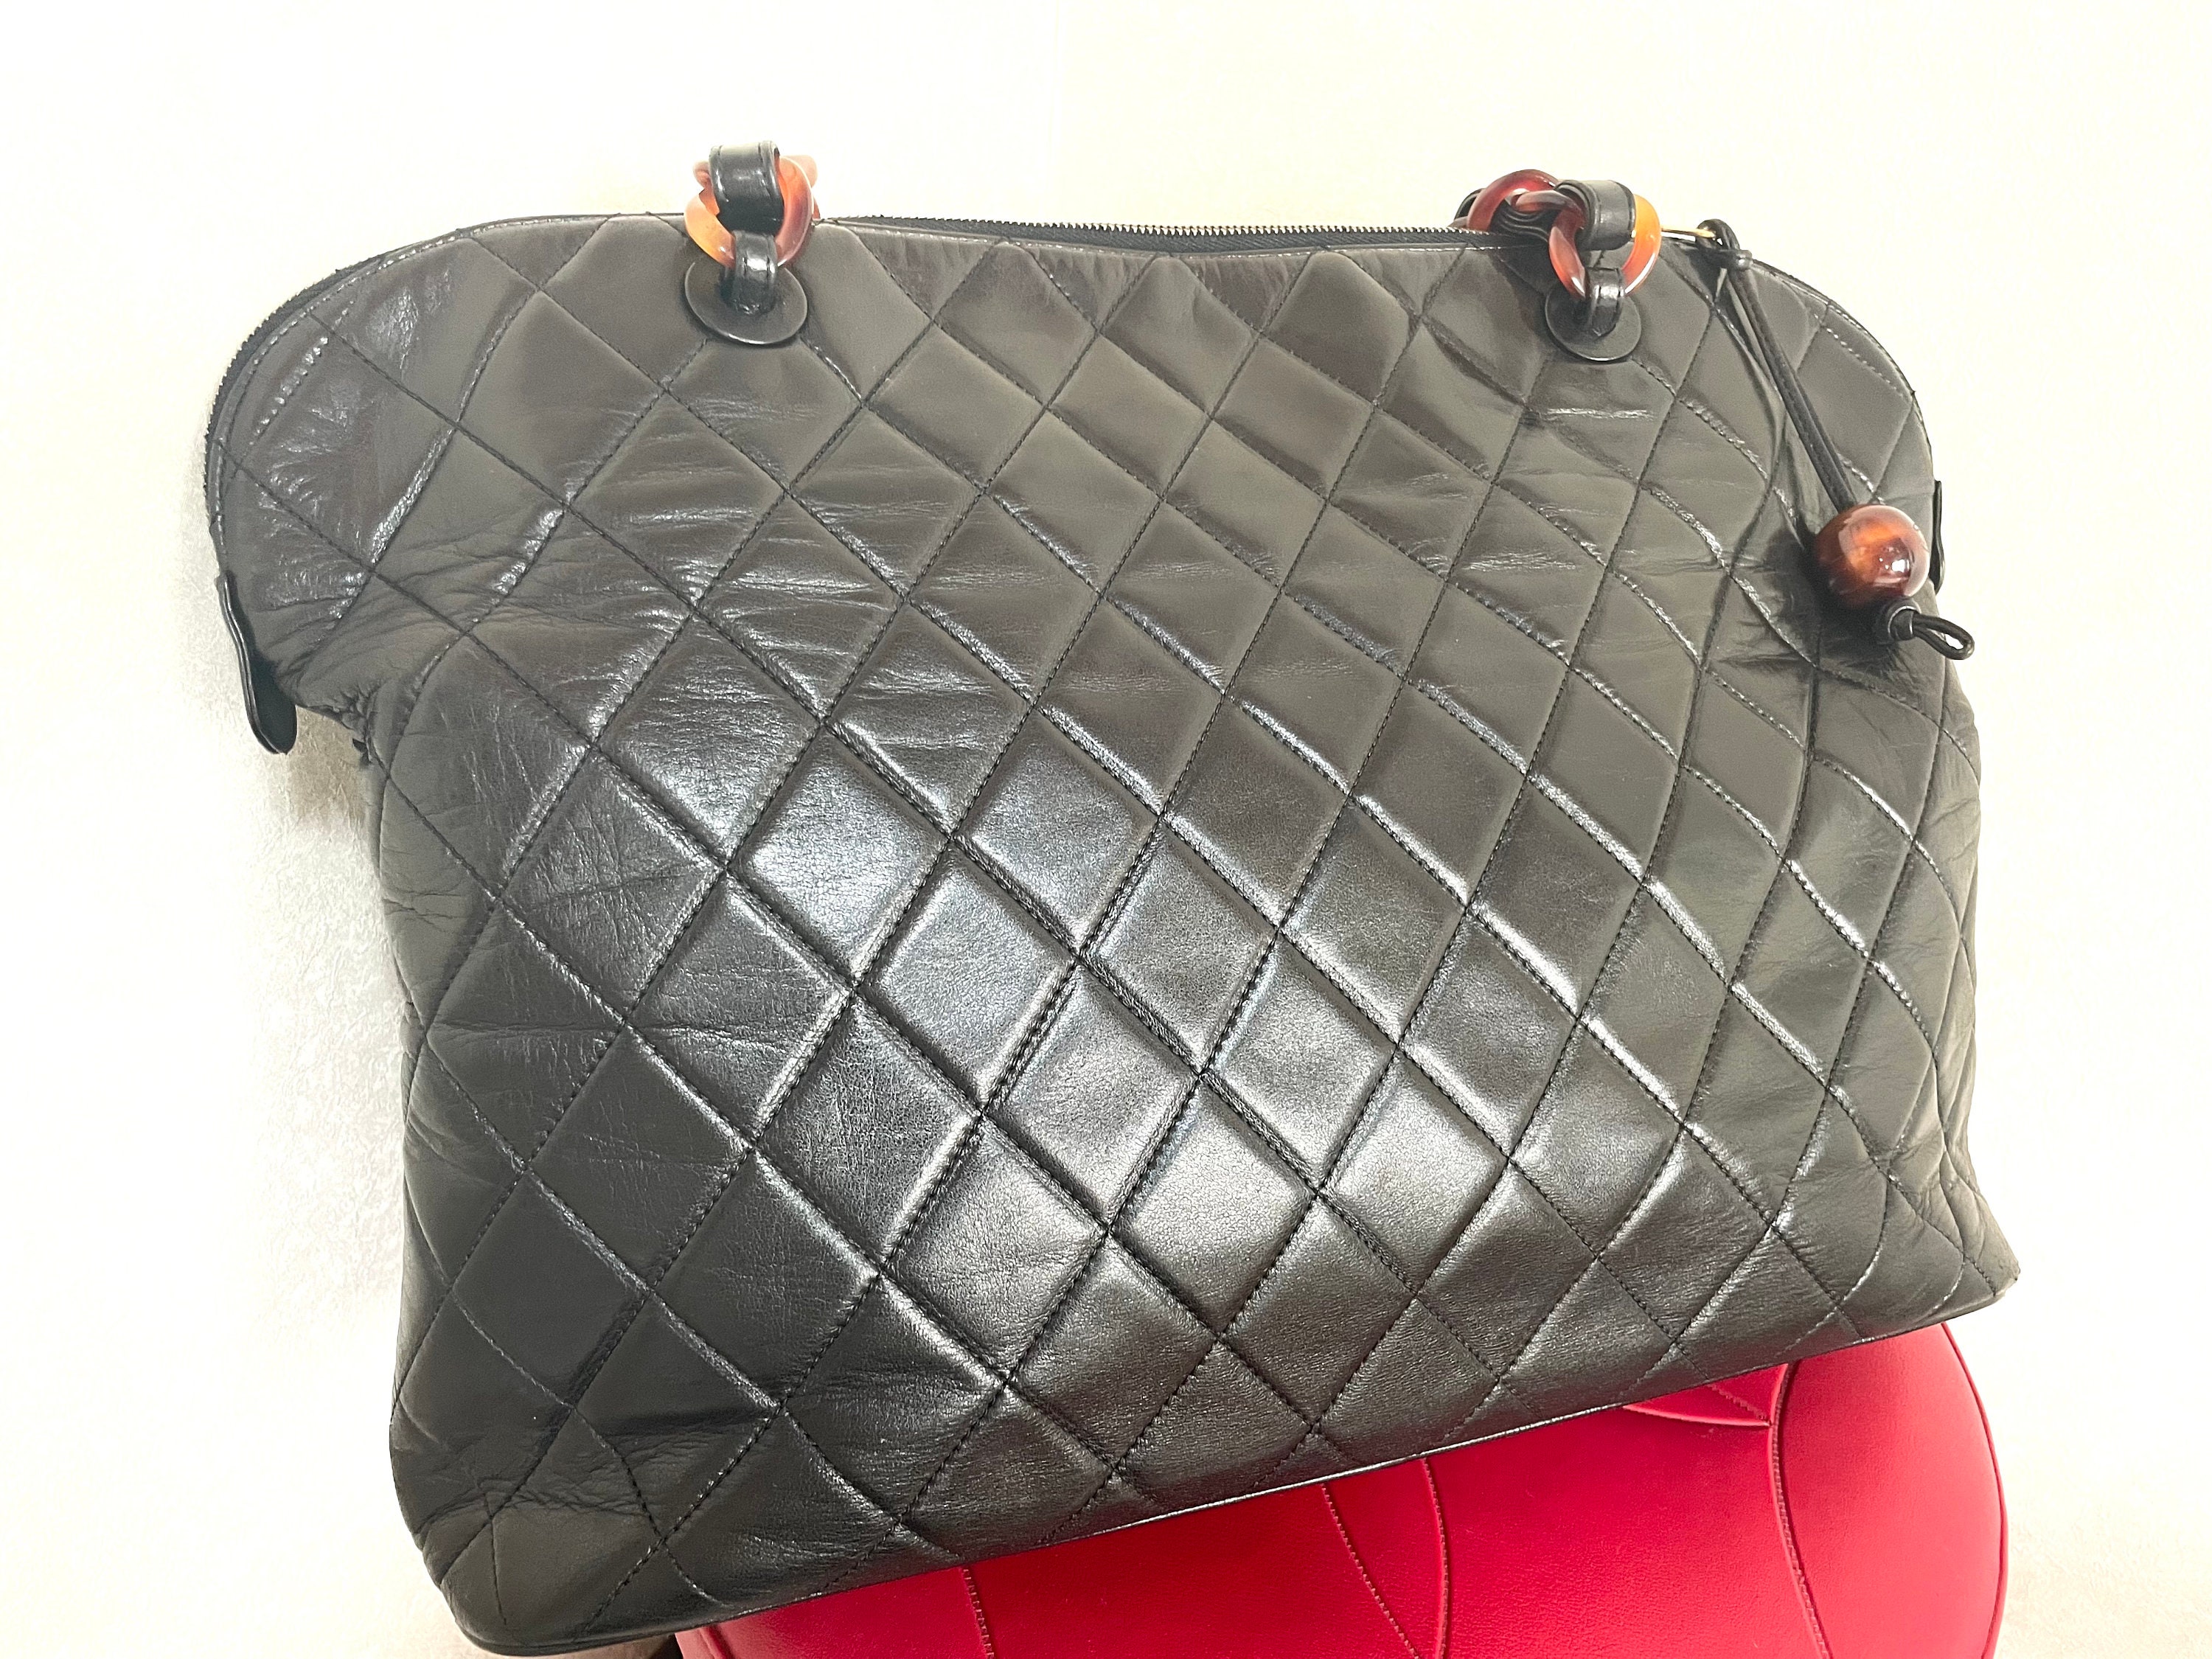 Does Chanel Cambon bowler bag look dated? : r/handbags